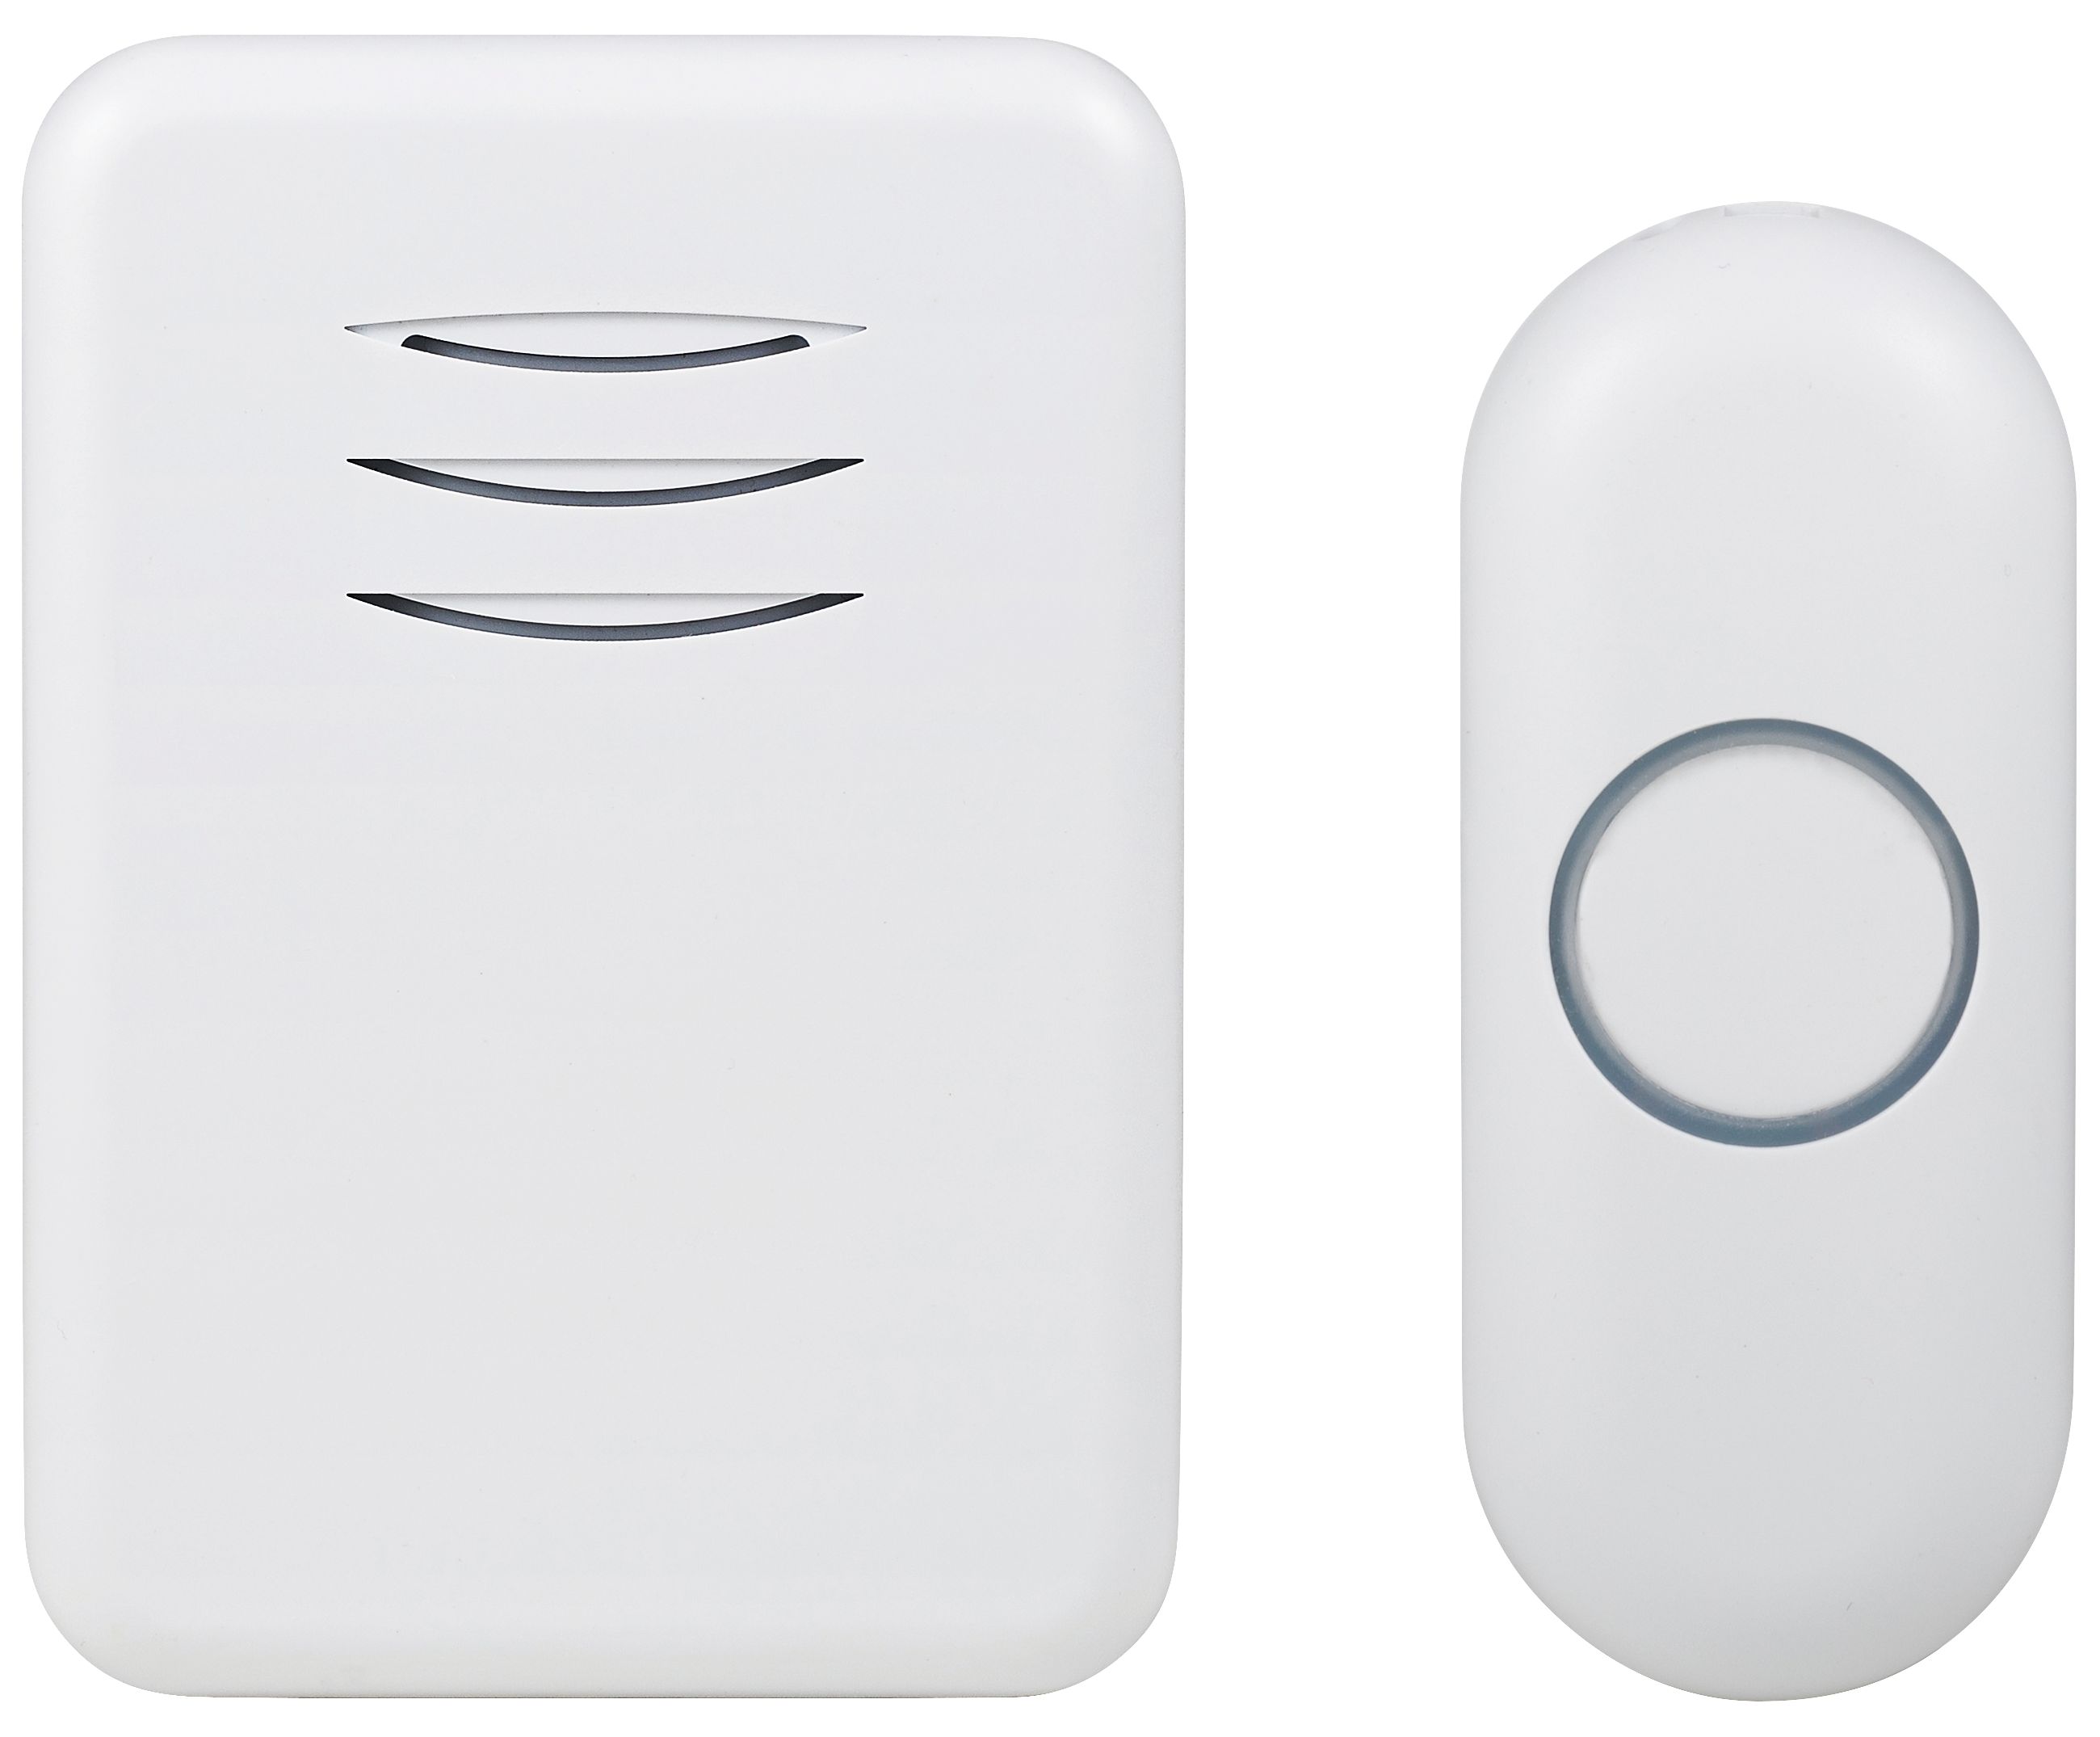 Byron DBY-22311 Wireless Doorbell with Portable Chime - 150m